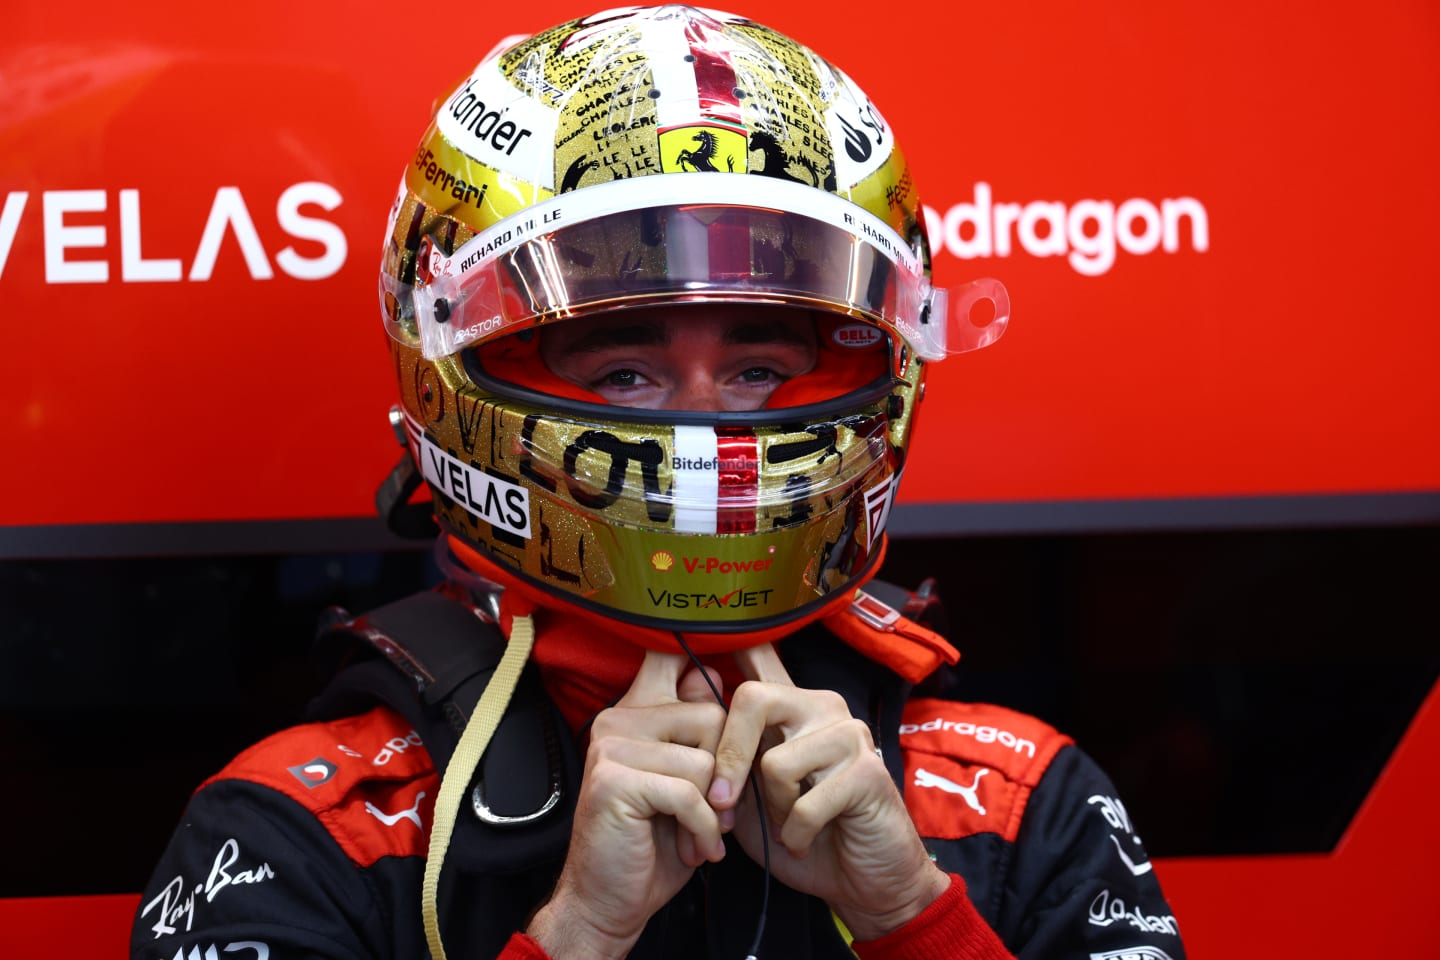 SINGAPORE, SINGAPORE - SEPTEMBER 30: Charles Leclerc of Monaco and Ferrari prepares to drive in the garage during practice ahead of the F1 Grand Prix of Singapore at Marina Bay Street Circuit on September 30, 2022 in Singapore, Singapore. (Photo by Clive Rose/Getty Images,)